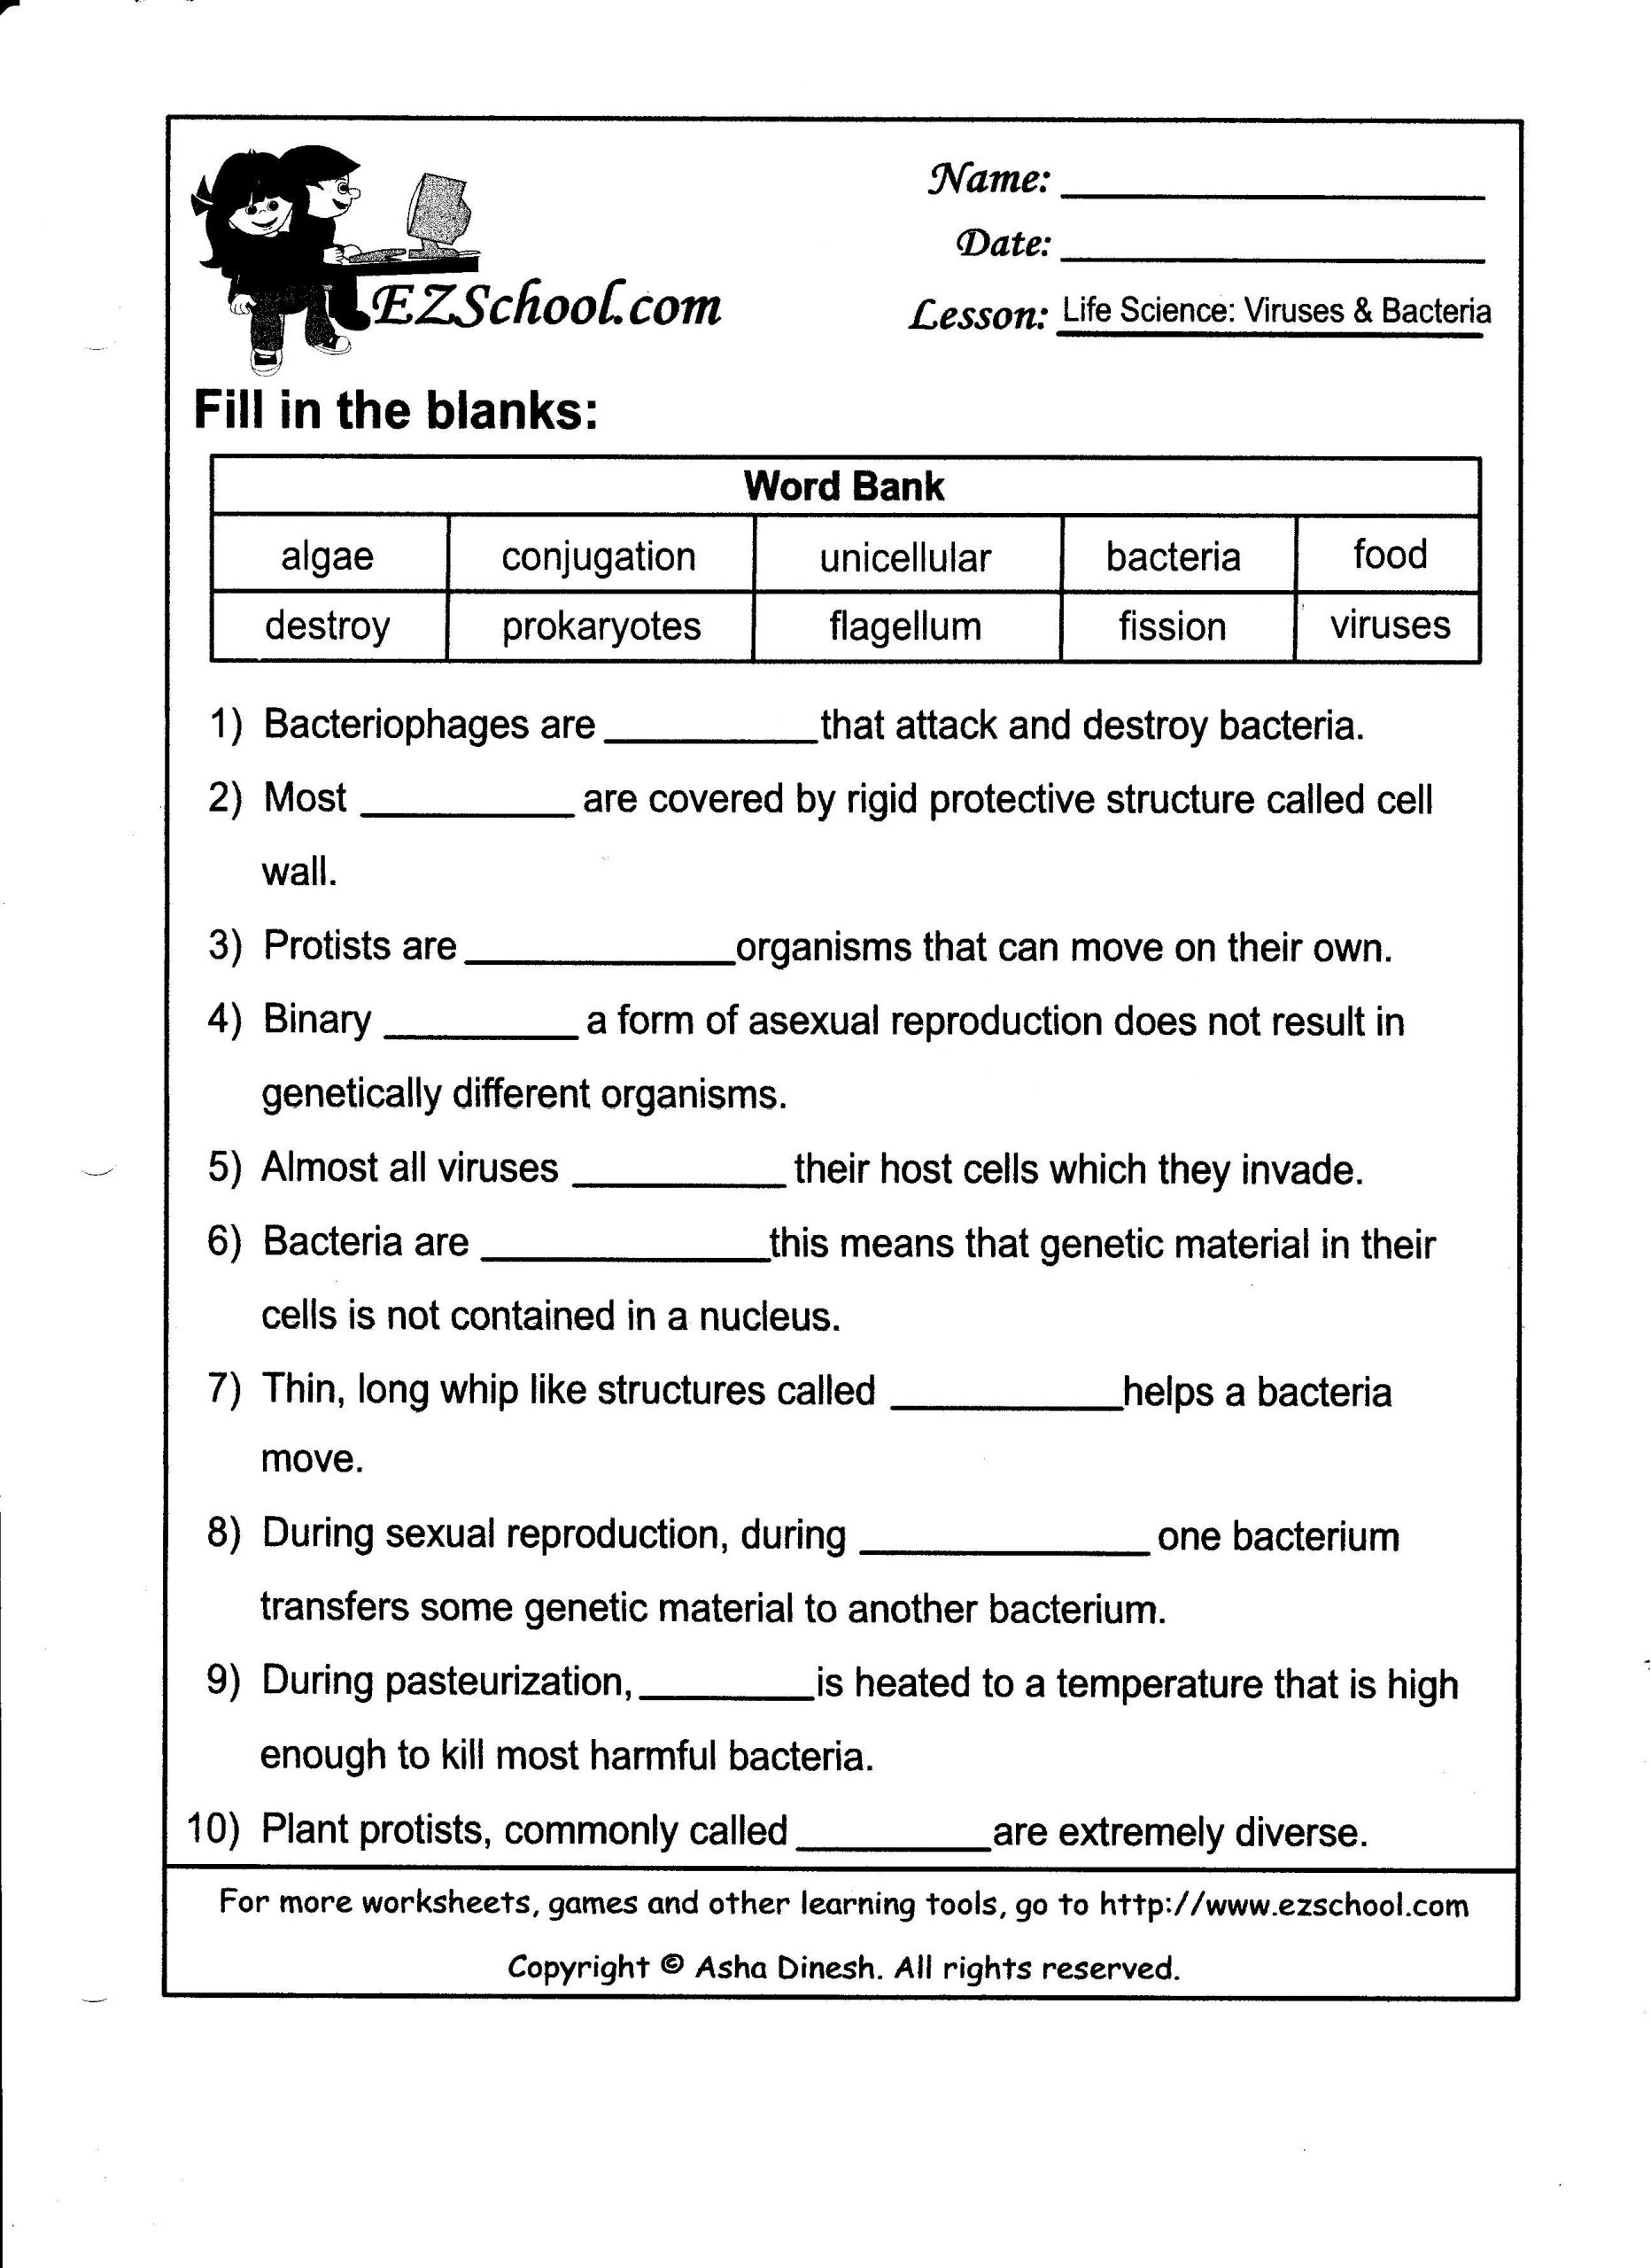 Virus and Bacteria Worksheet Answers Worksheets Bacteria and Viruses Worksheet Week 11 Cell